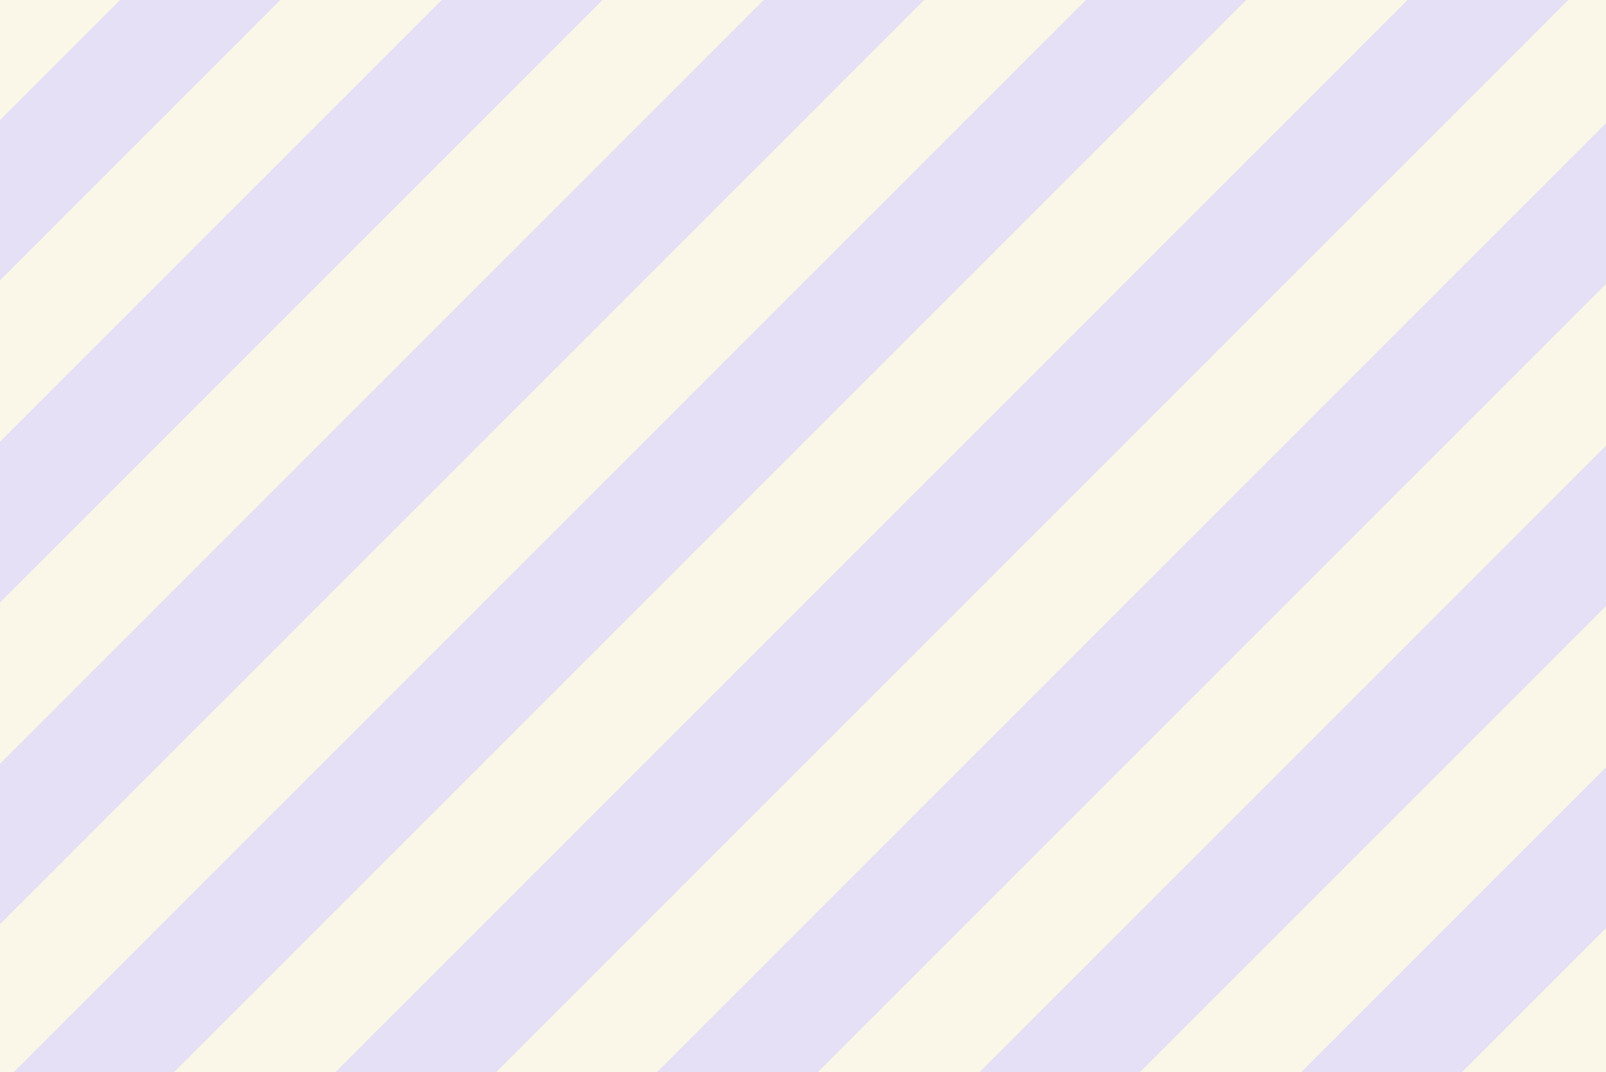 Pastel purple and white striped background